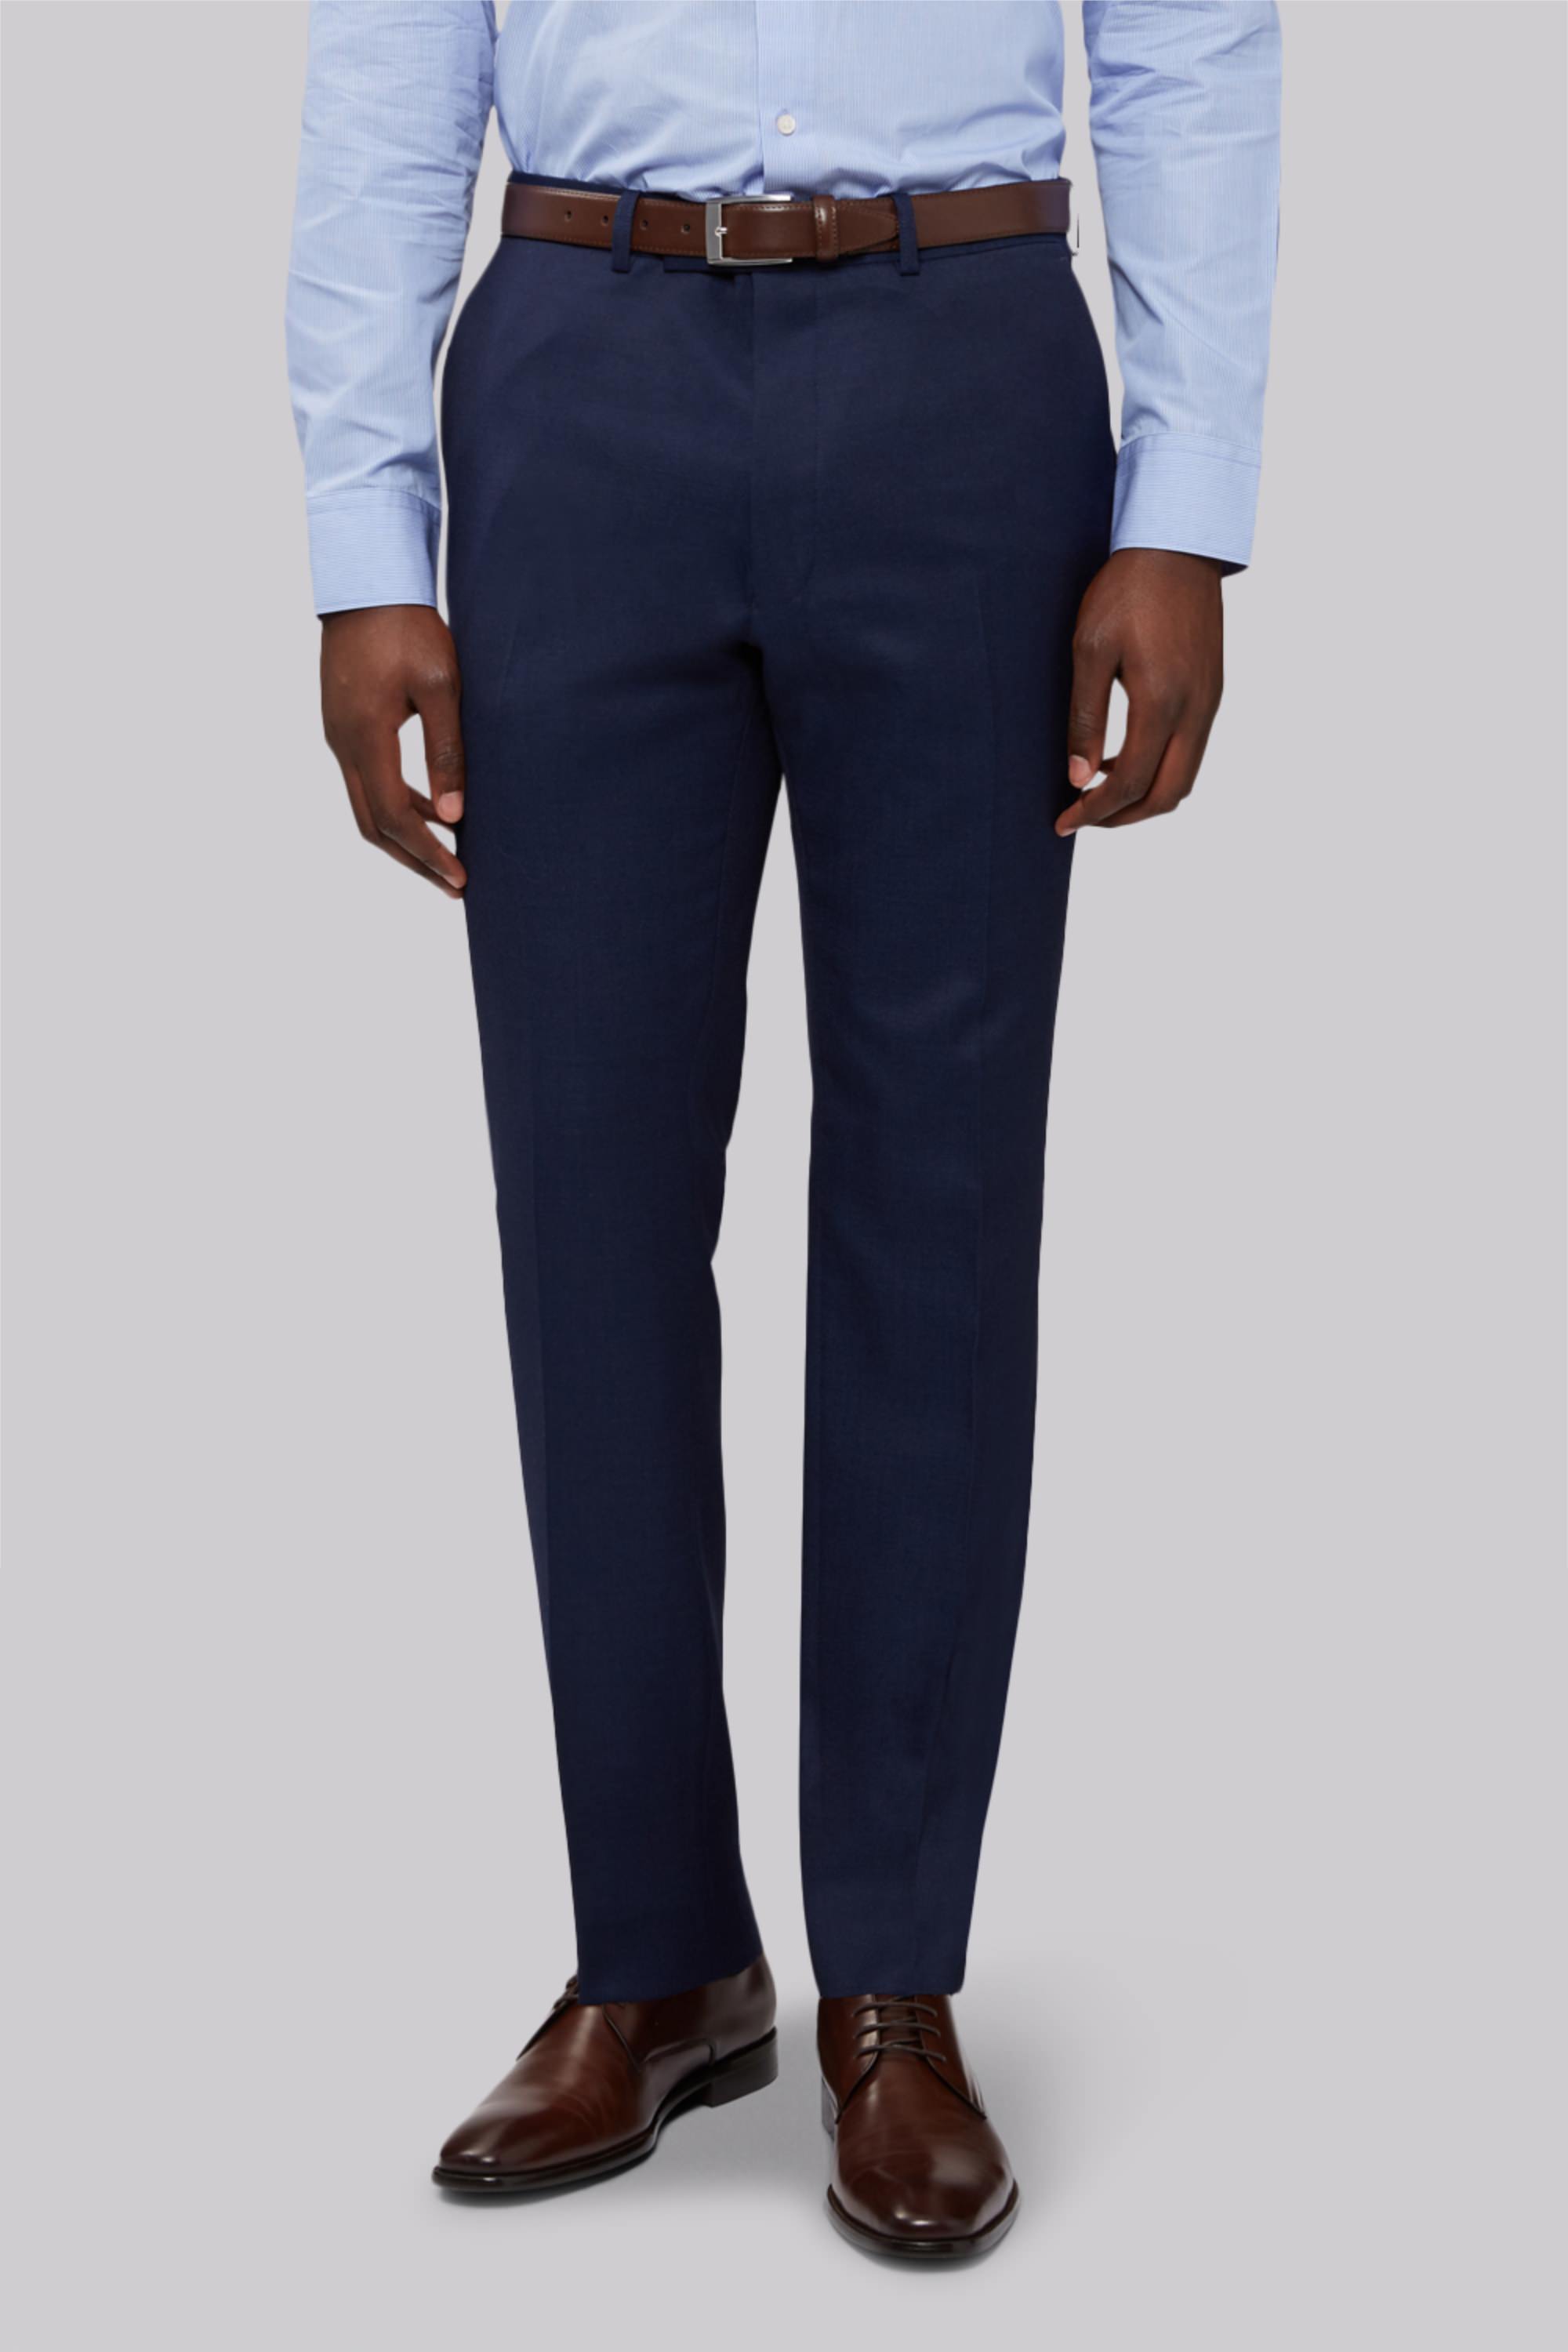 French Connection Slim Fit Bright Blue Milled Trouser